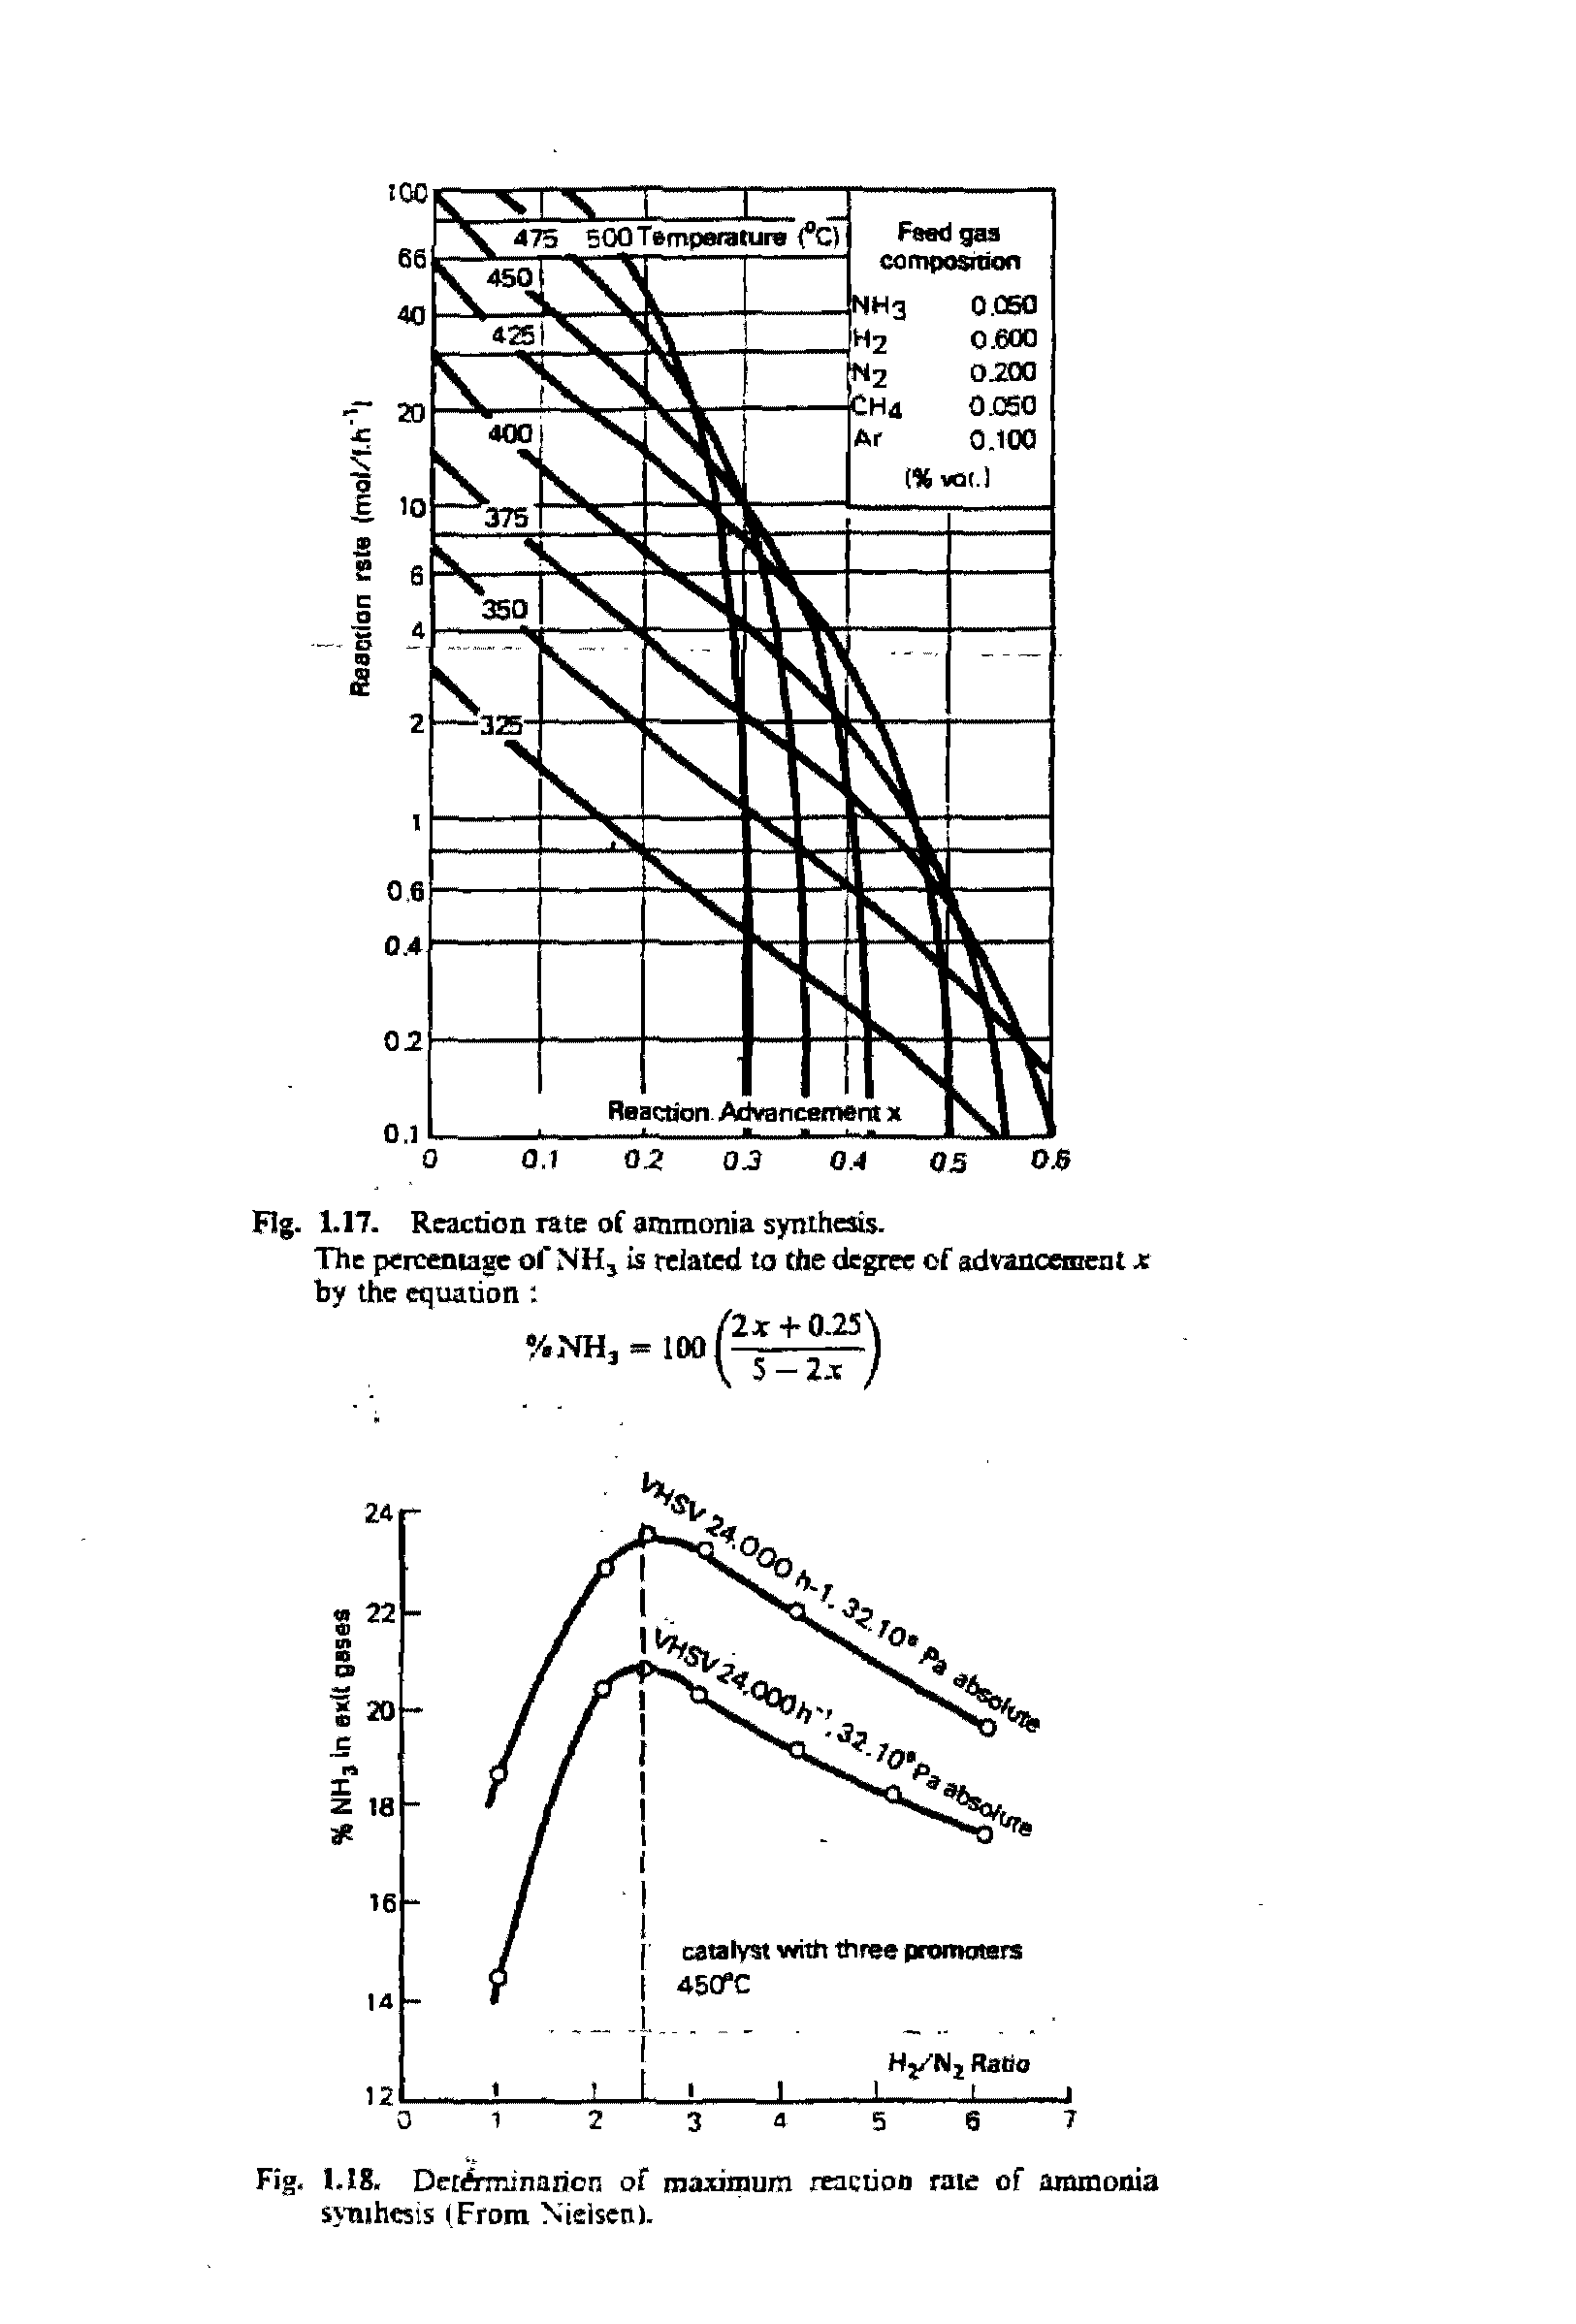 Fig. 1.18. DetAminarion of maximum reaction rate of ammonia synthesis (From Nielsen).